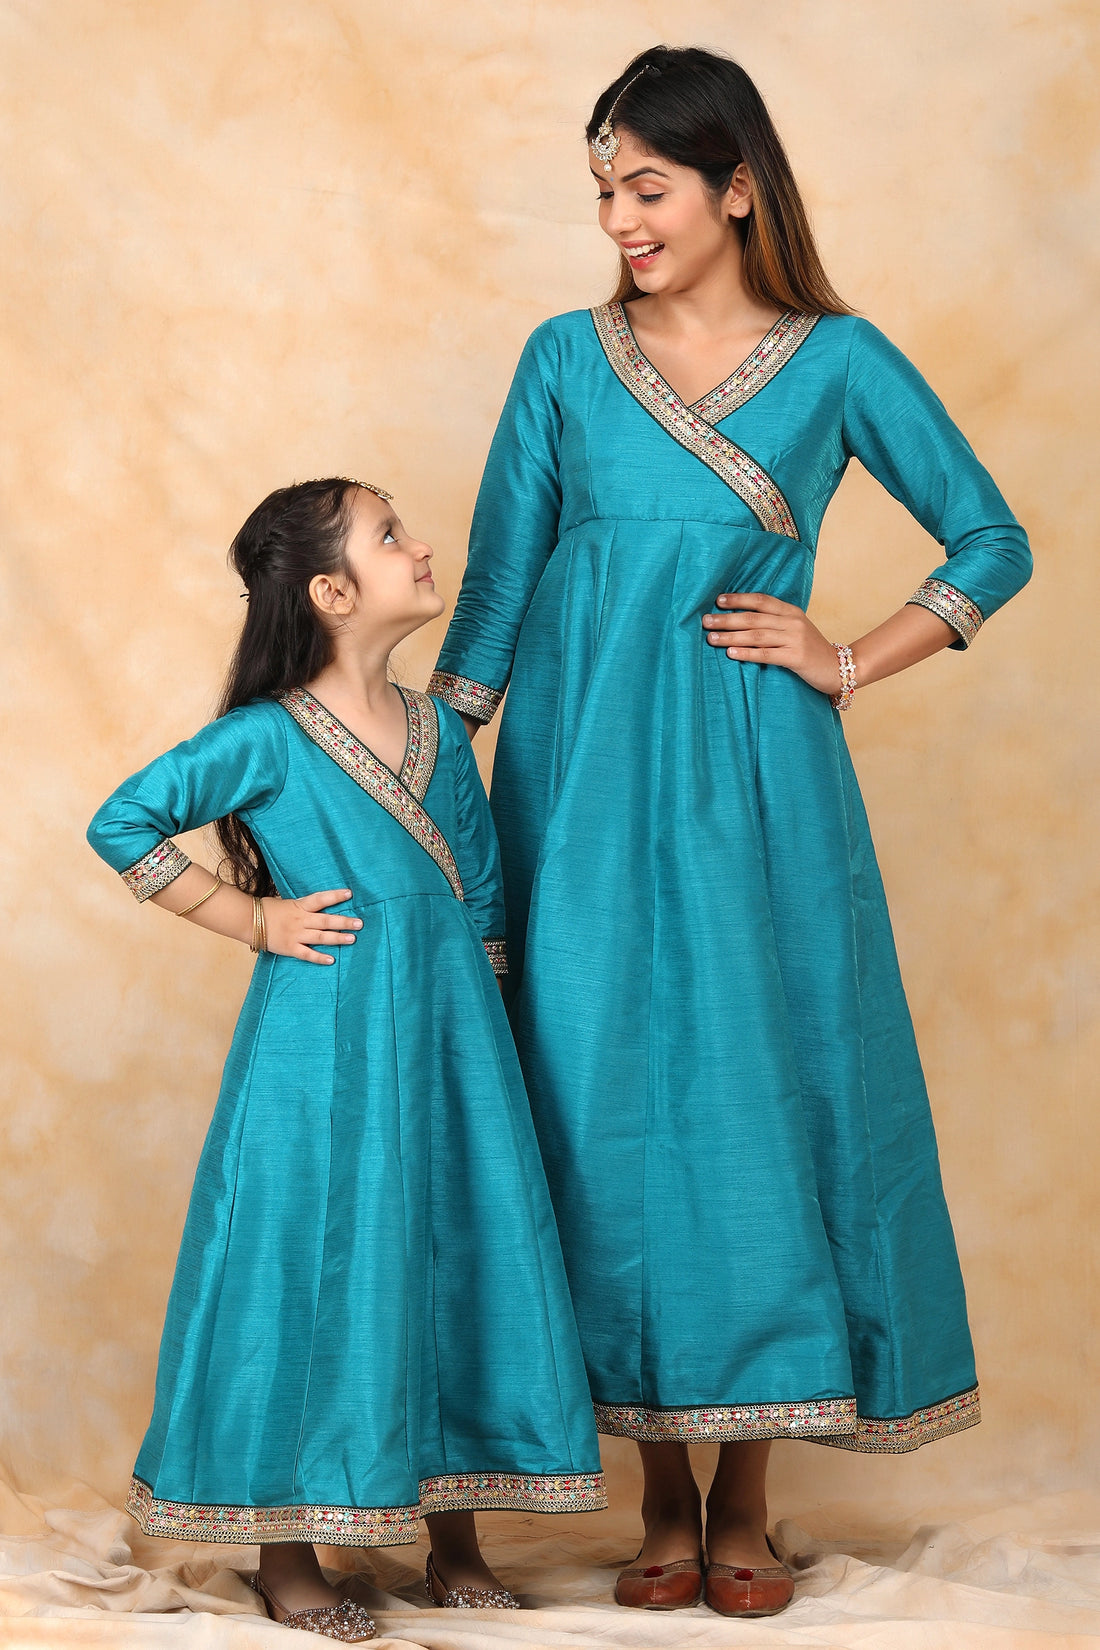 Exquisite Peacock Blue Ethnic Silk Gown Set for Mom and Daughter – Perfectly Coordinated Twin Outfits